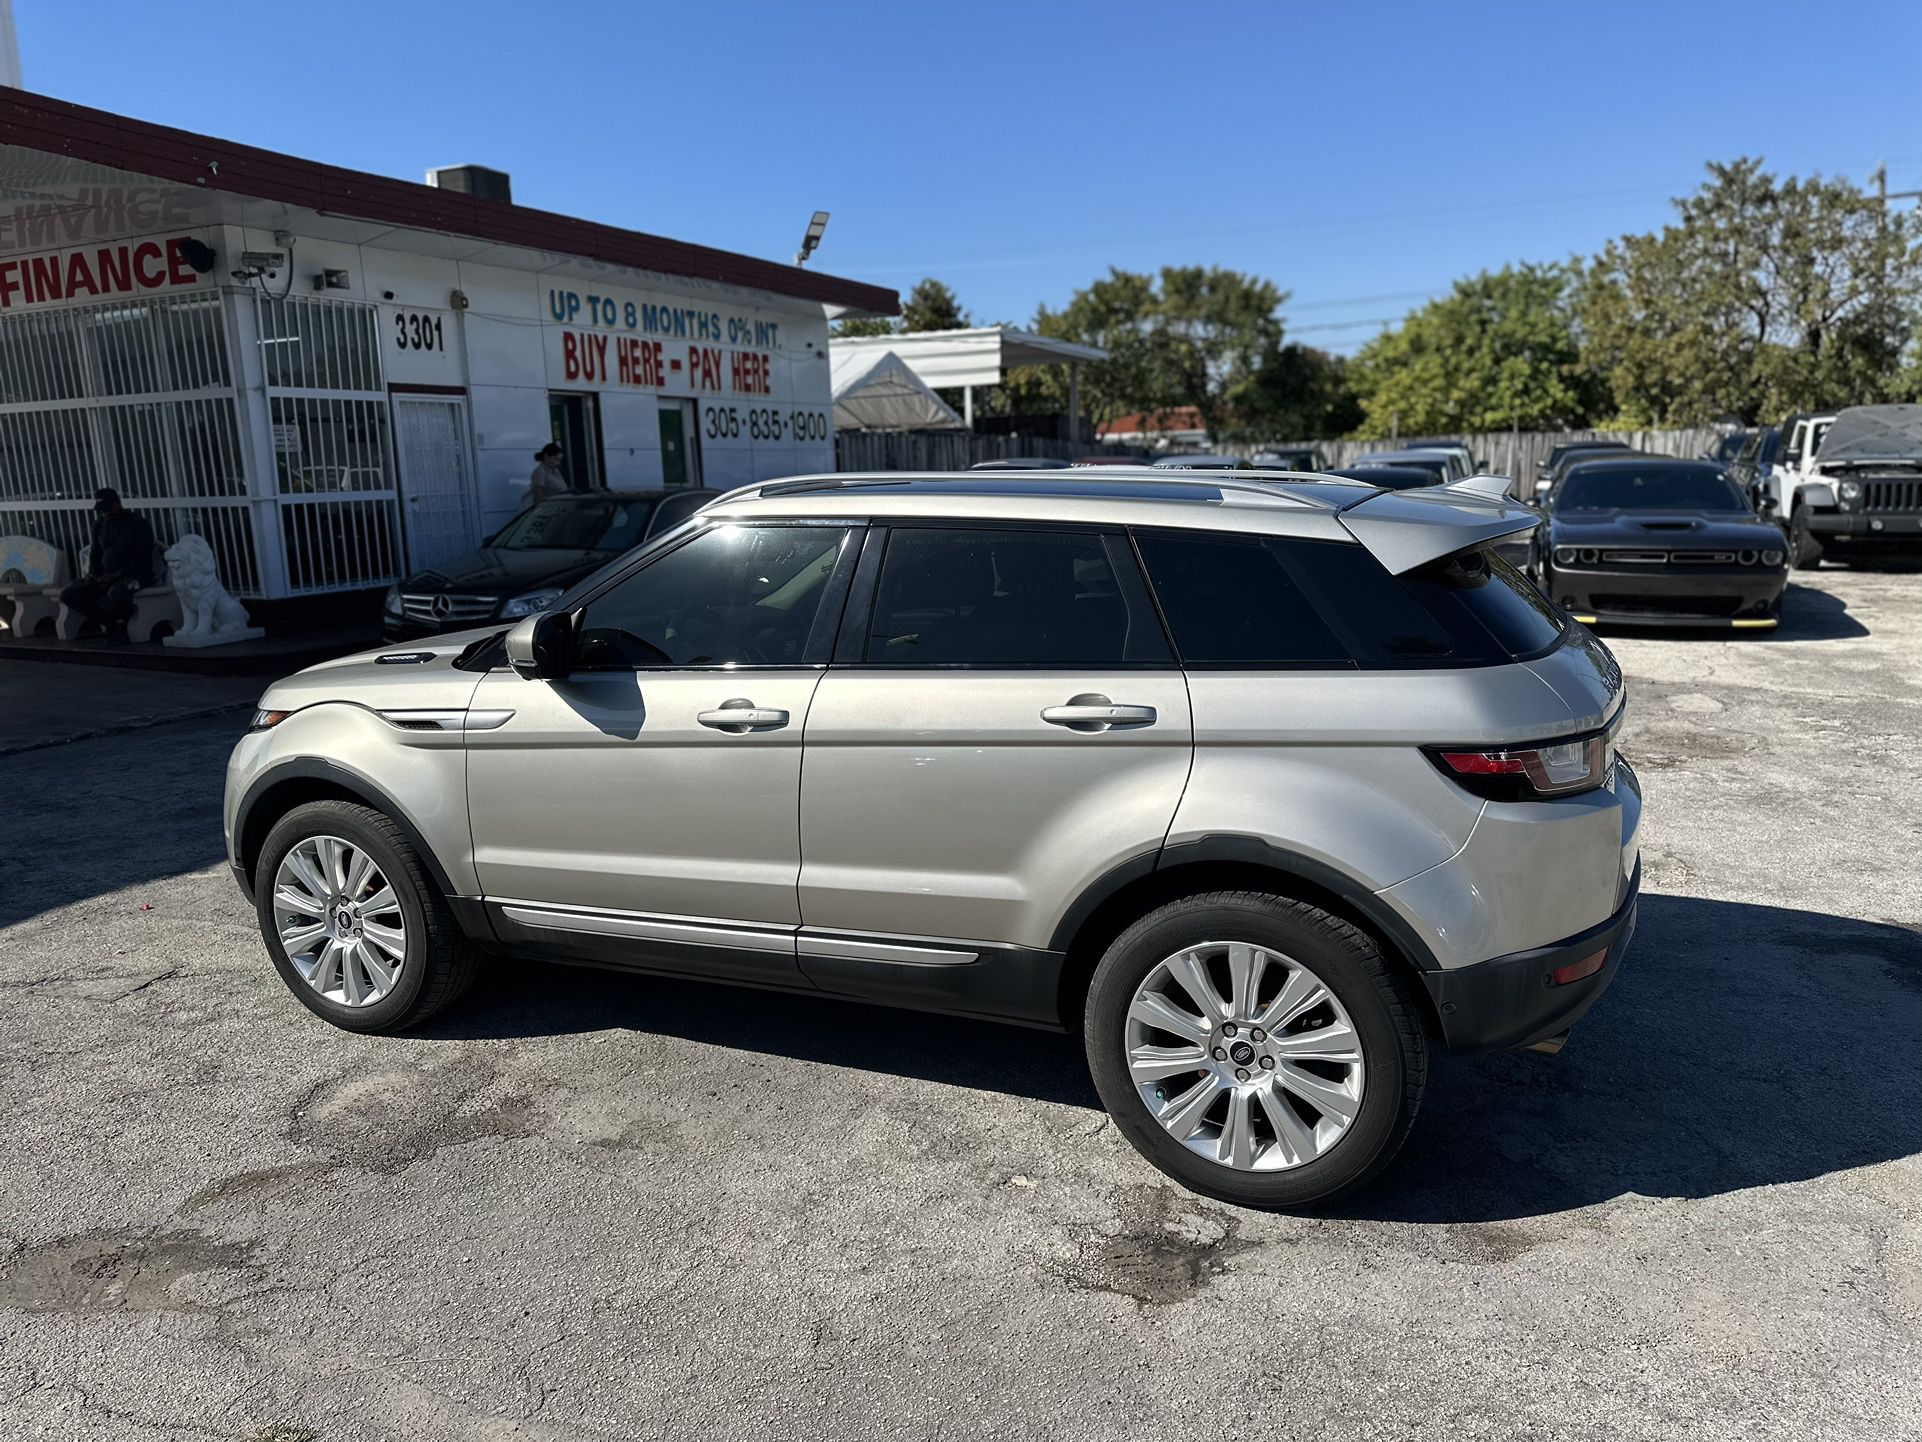 used 2017 Land Rover evoque - back view